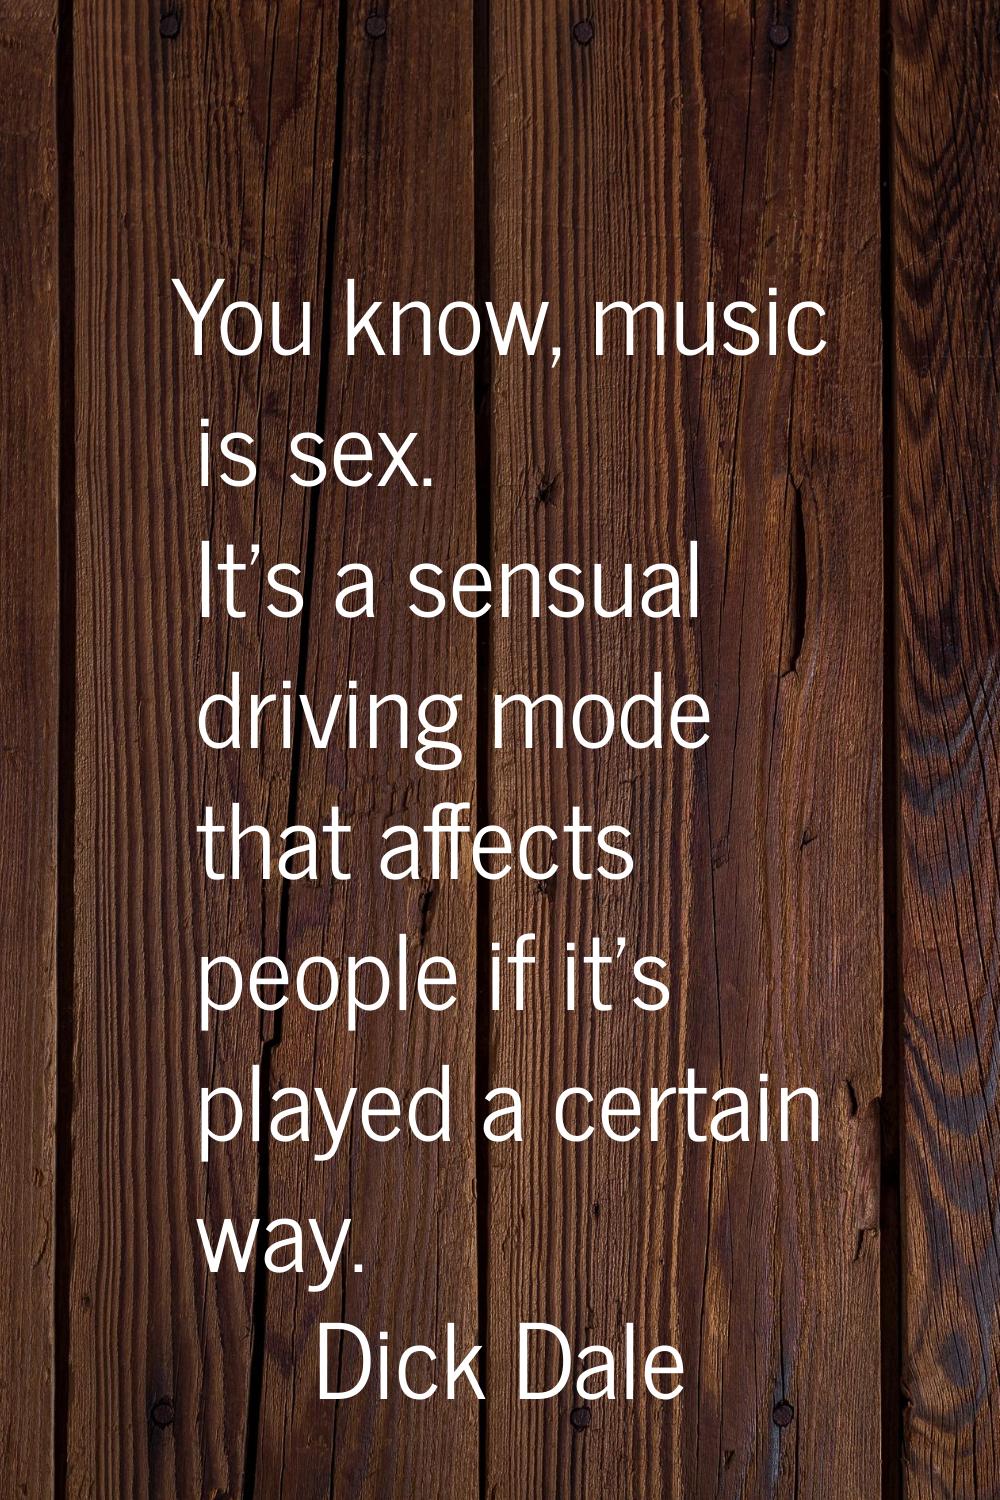 You know, music is sex. It's a sensual driving mode that affects people if it's played a certain wa